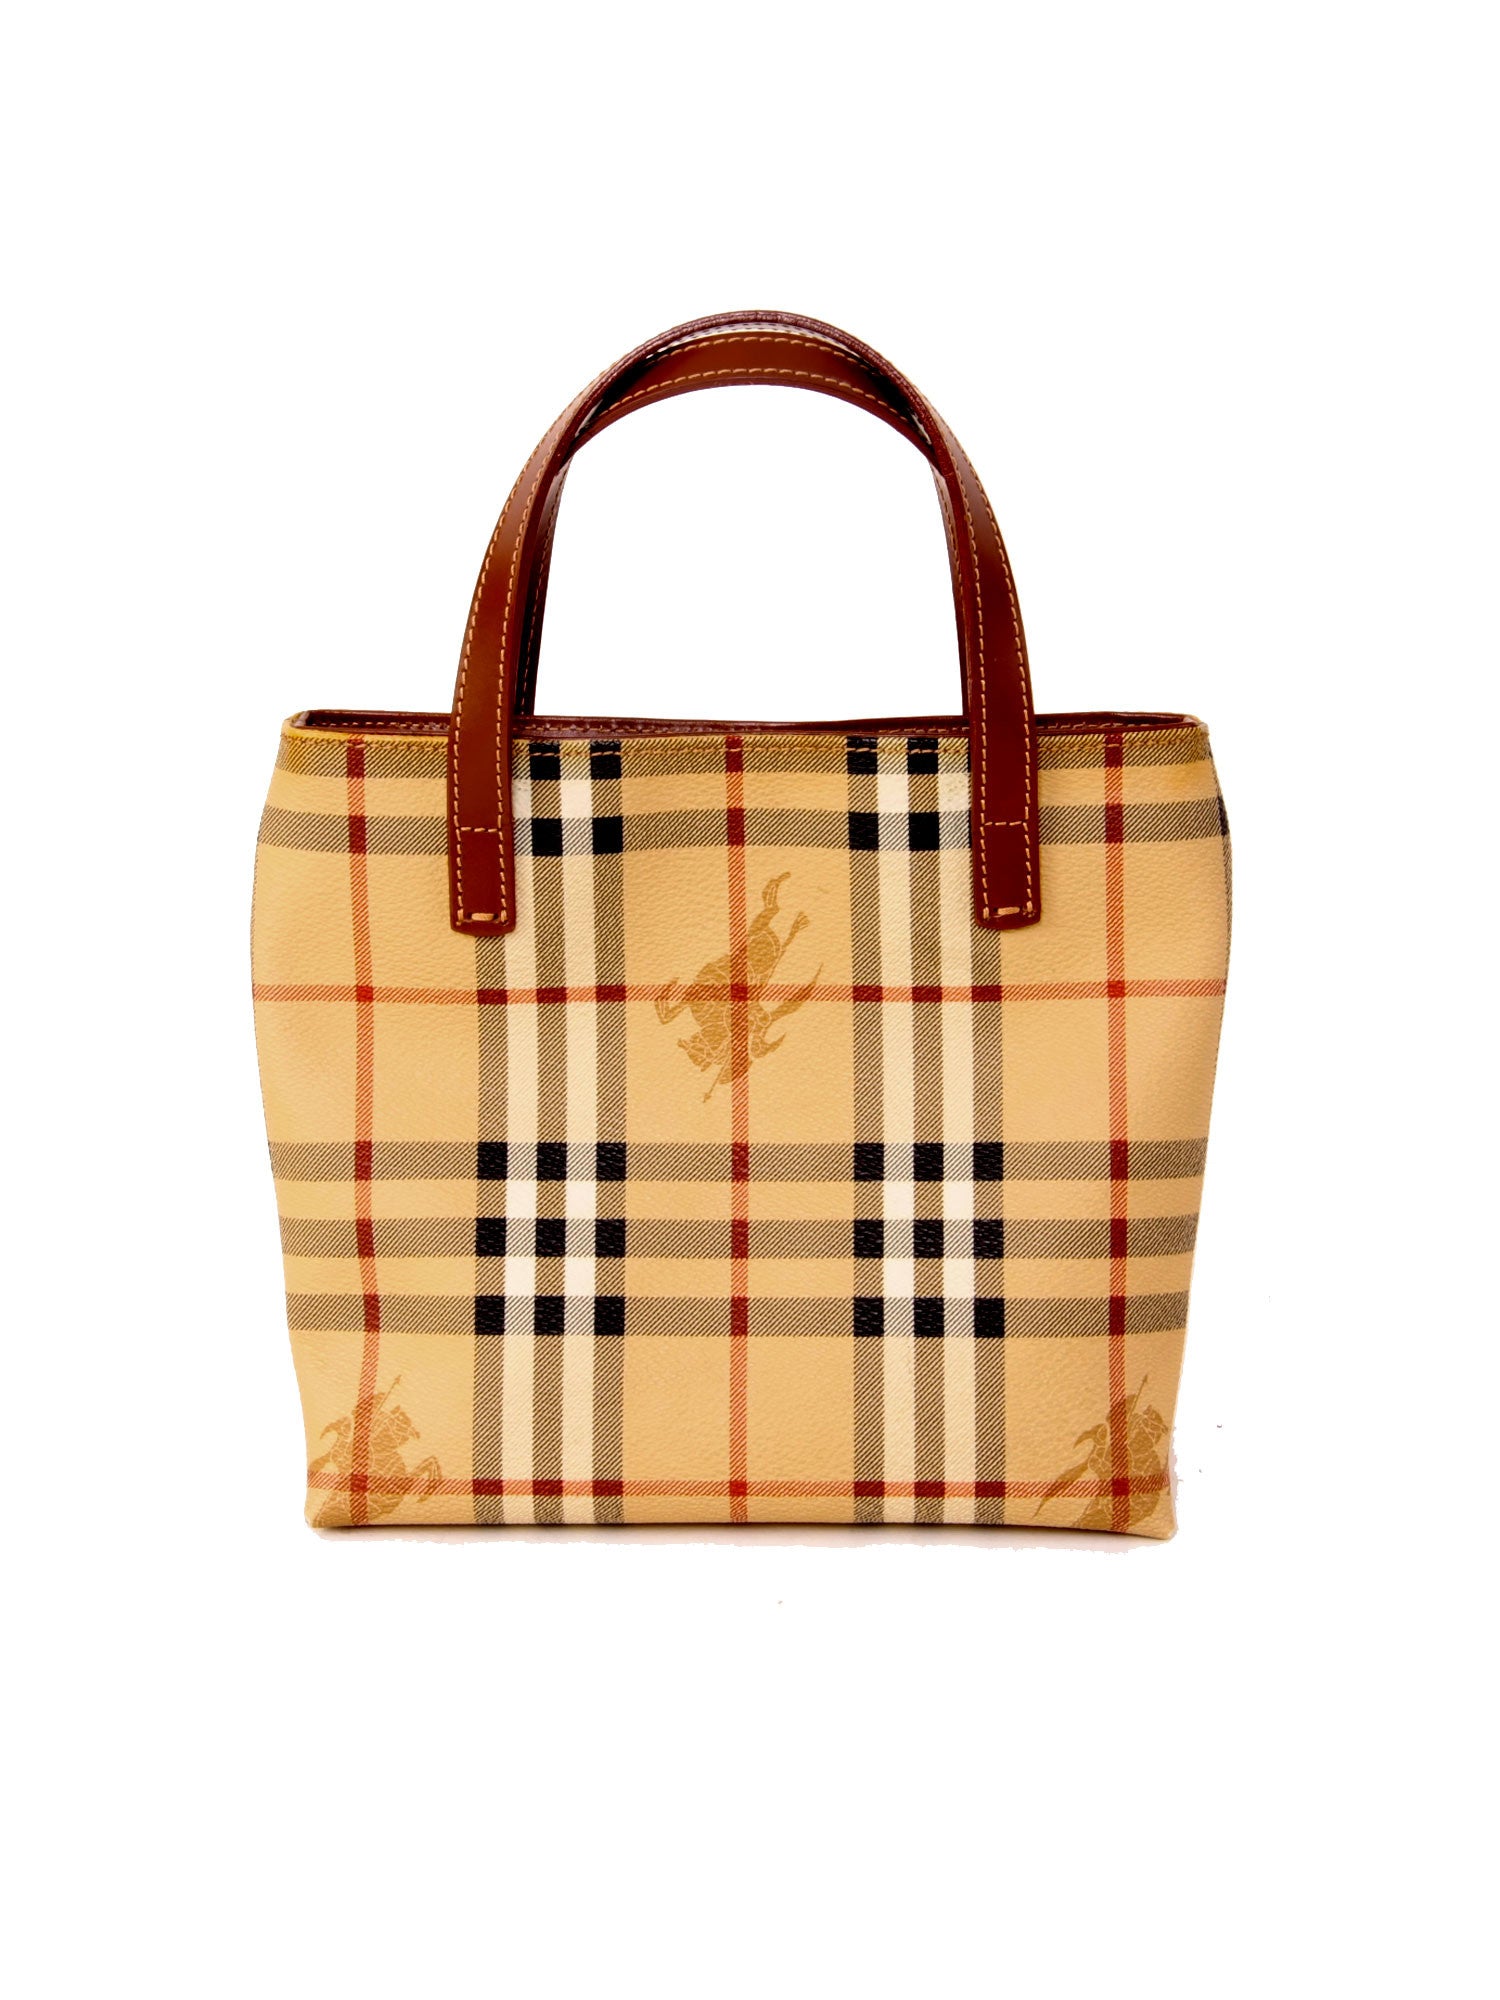 Burberry Mini Tote Bag in Coated Canvas With Check Pettern in 